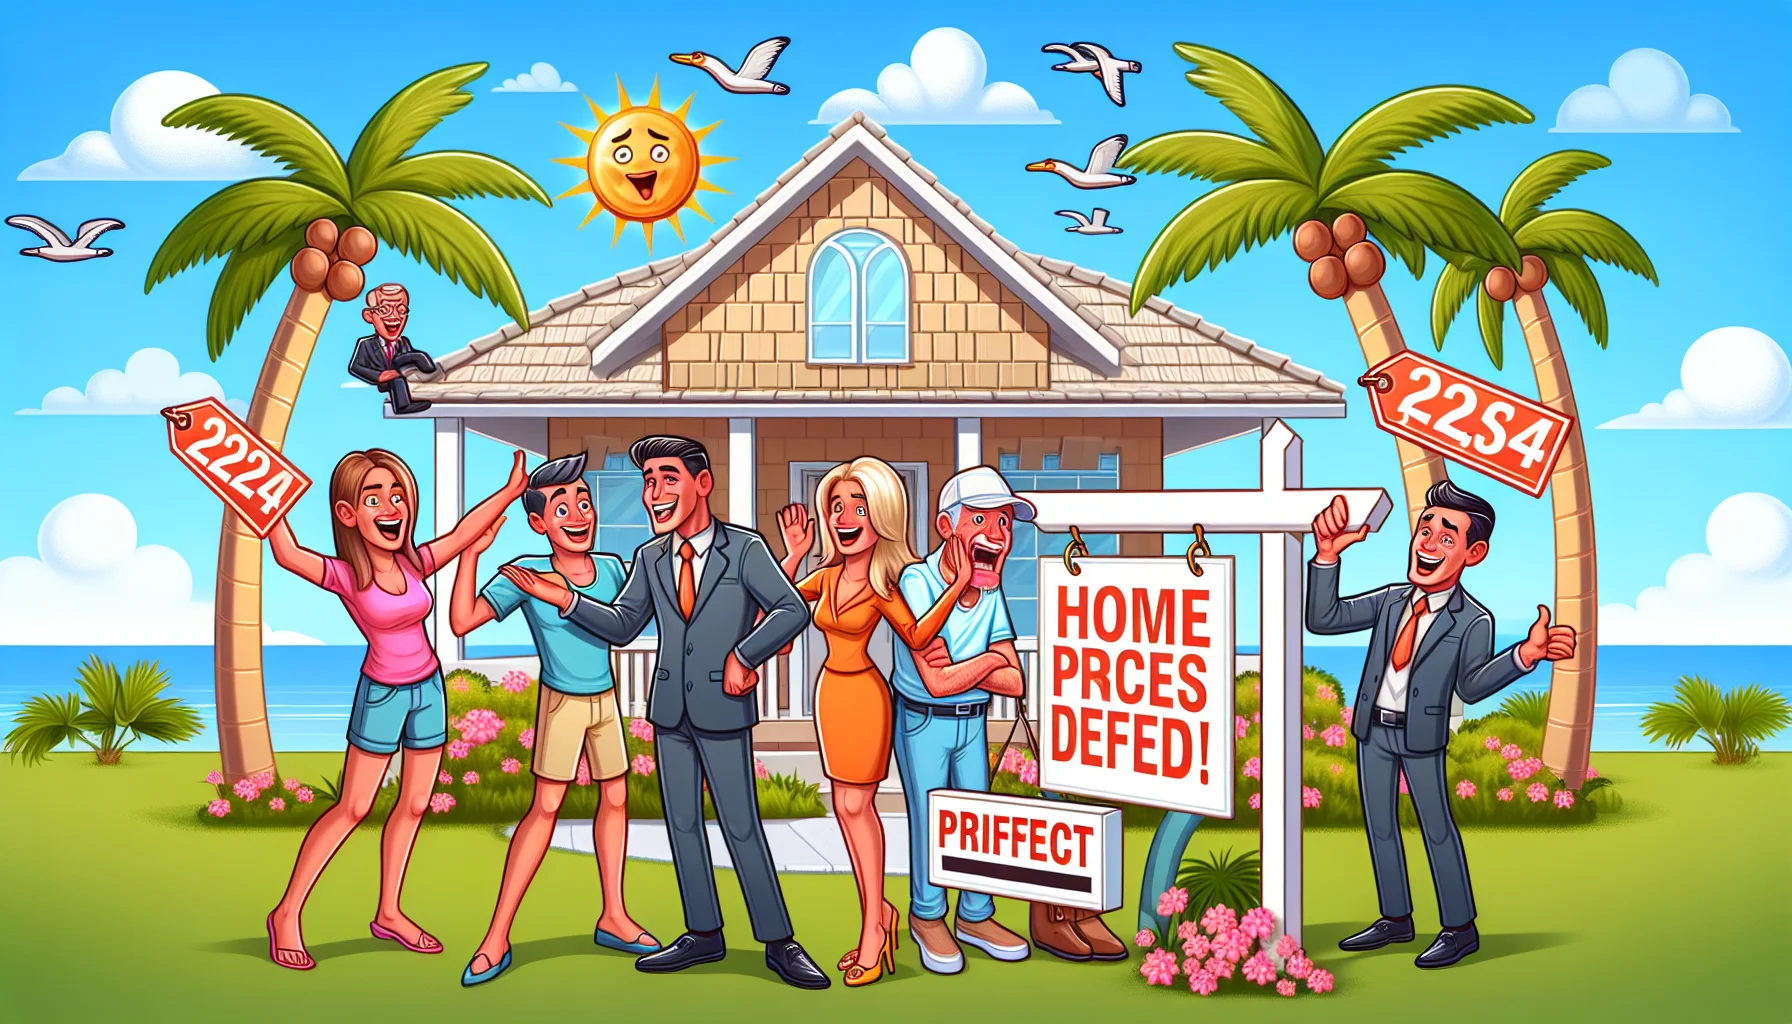 Create a humorous and realistic scene showcasing a 'perfect' real estate scenario in Florida in 2024 where home prices are dropping. The image might include elements like happy home buyers, real estate agents with expressions of disbelief, and price tags with drastically reduced numbers. Also, incorporate characteristics of Florida such as palm trees and sunny weather.